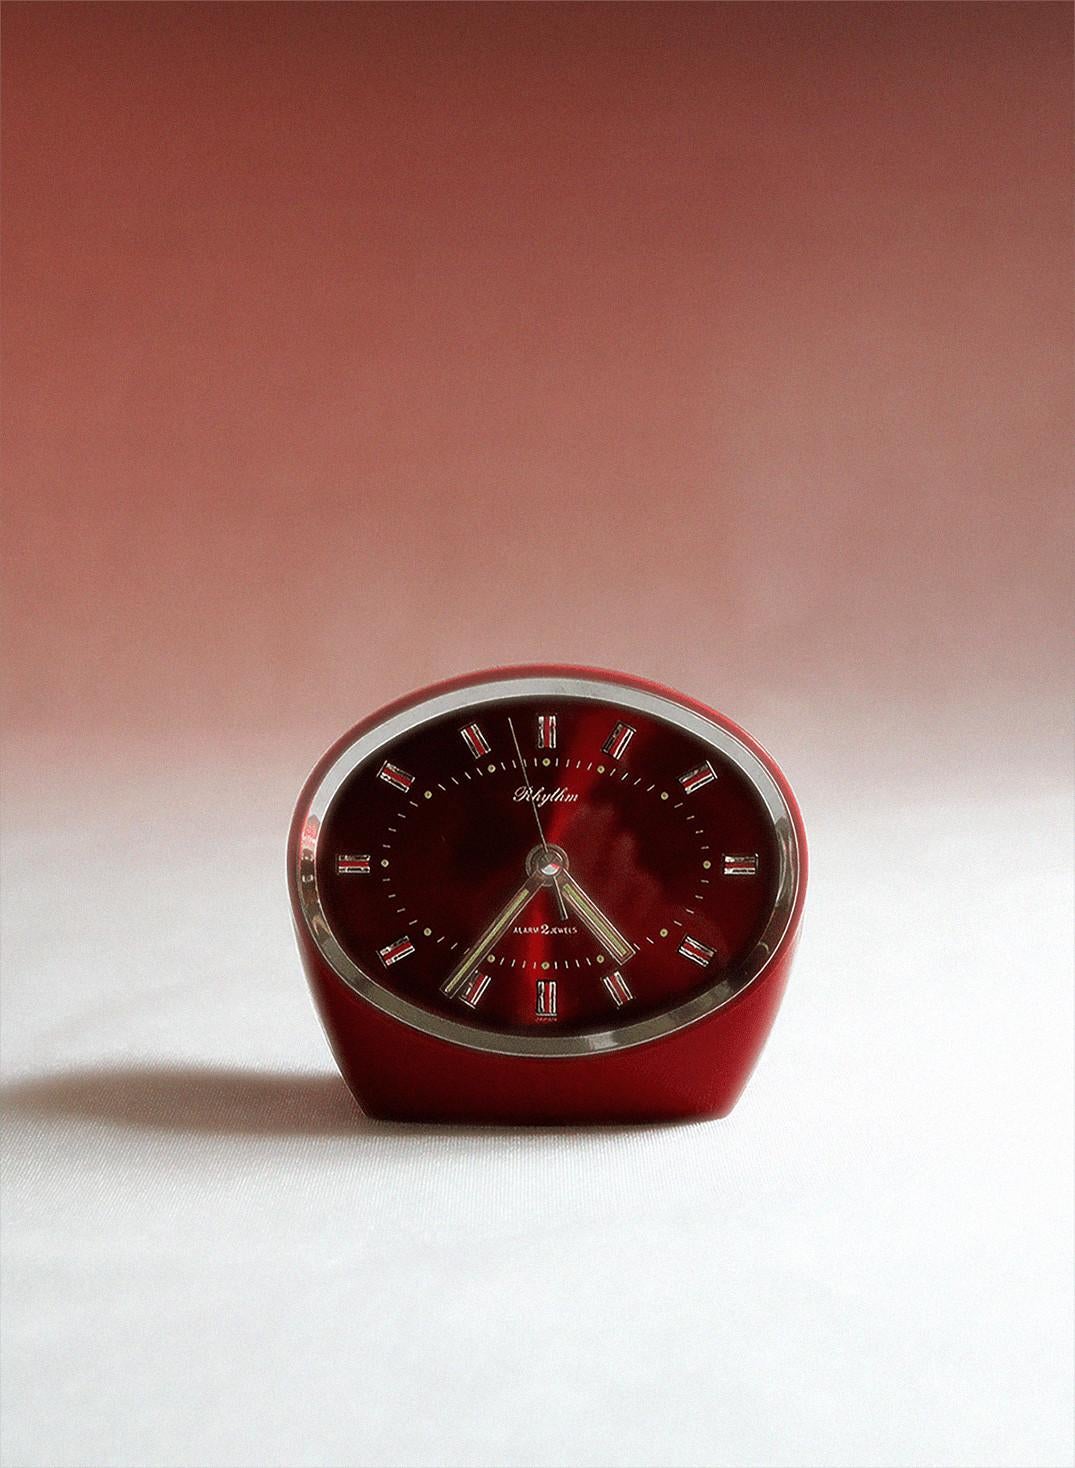 This rare and stylish vintage Rhythm Alarm Clock immediately falls within the Space Age style due to its shape. It was made in Japan in the 1960s by Rhythm, a Japanese company that has been making clocks since the 1950s. With the holographic face,